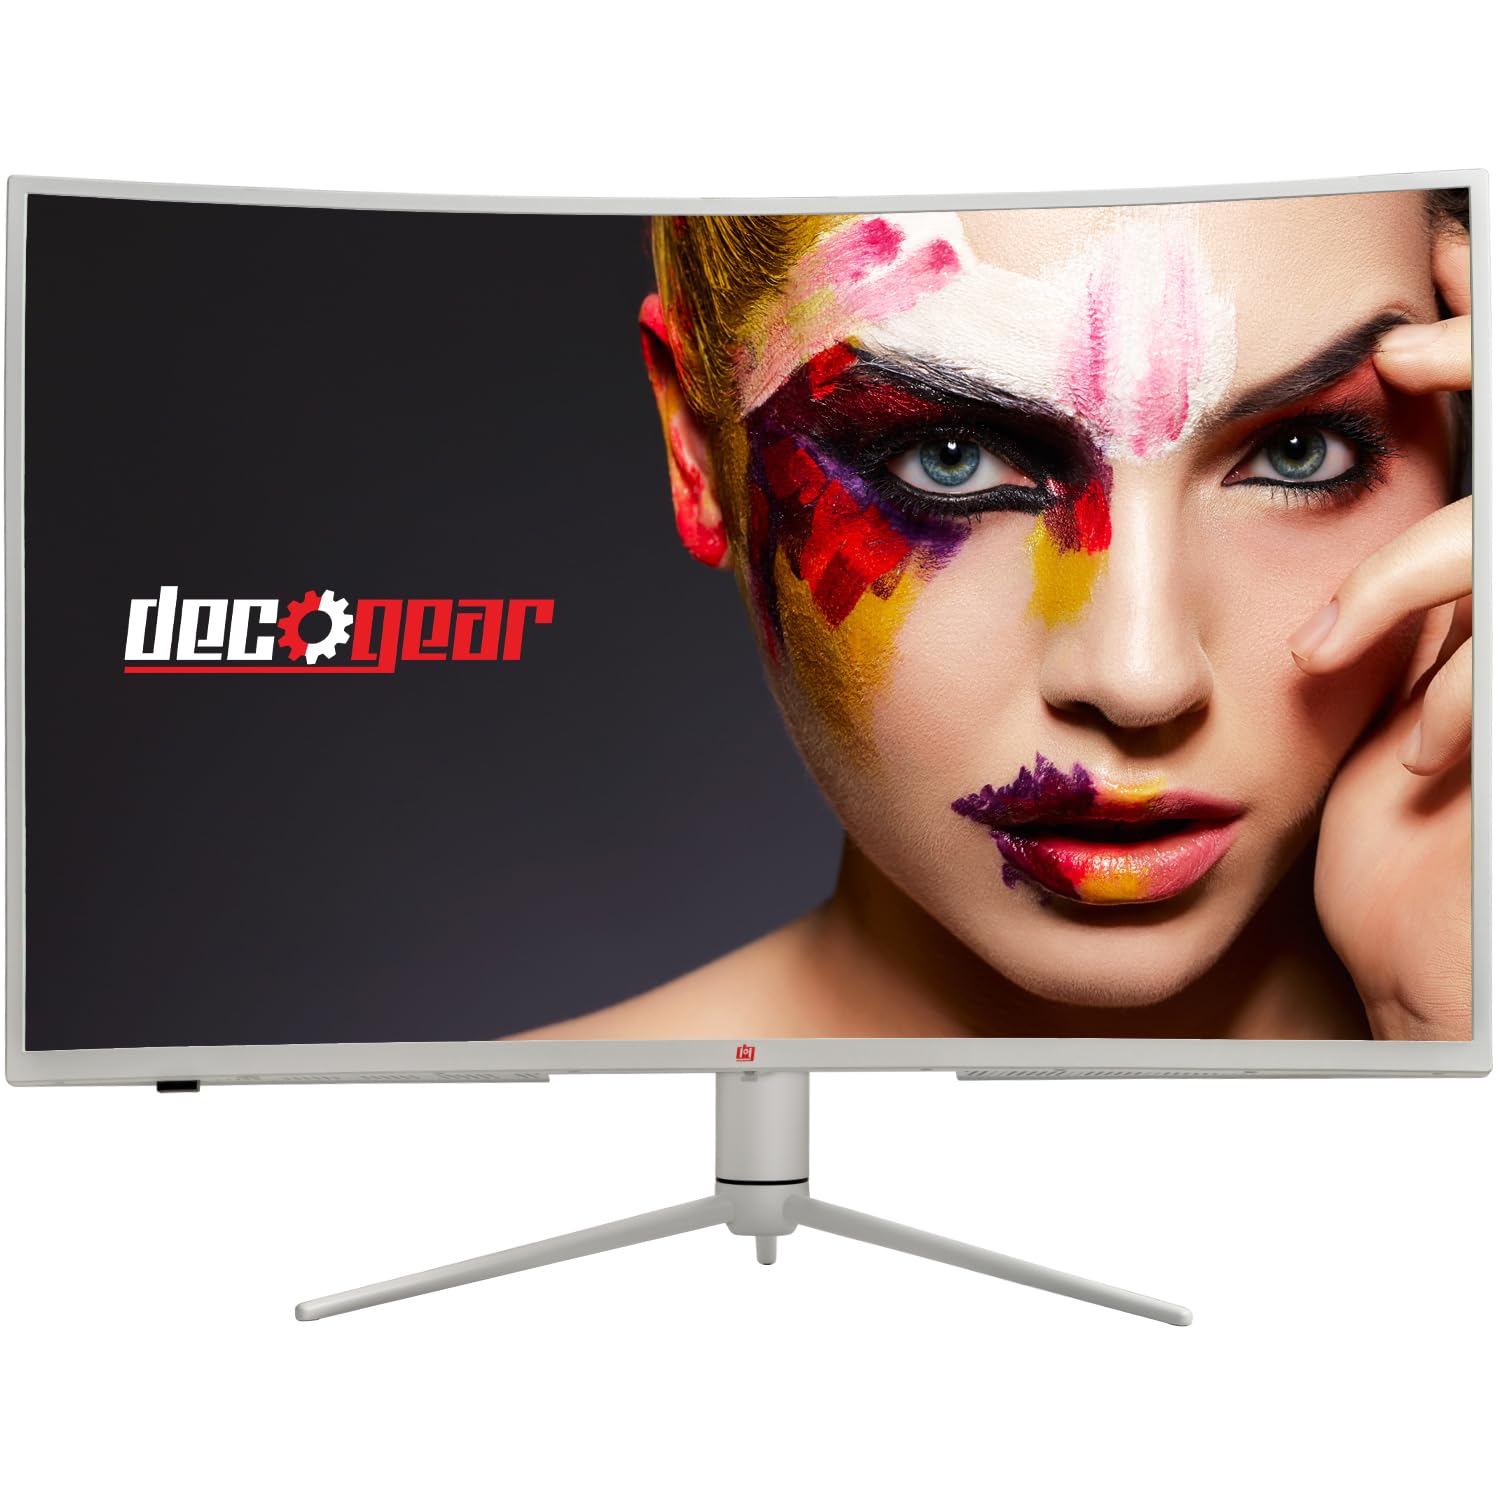 39” Deco Gear 2560x1440 165Hz Curved HDR400 Gaming Monitor $270 + free s/h